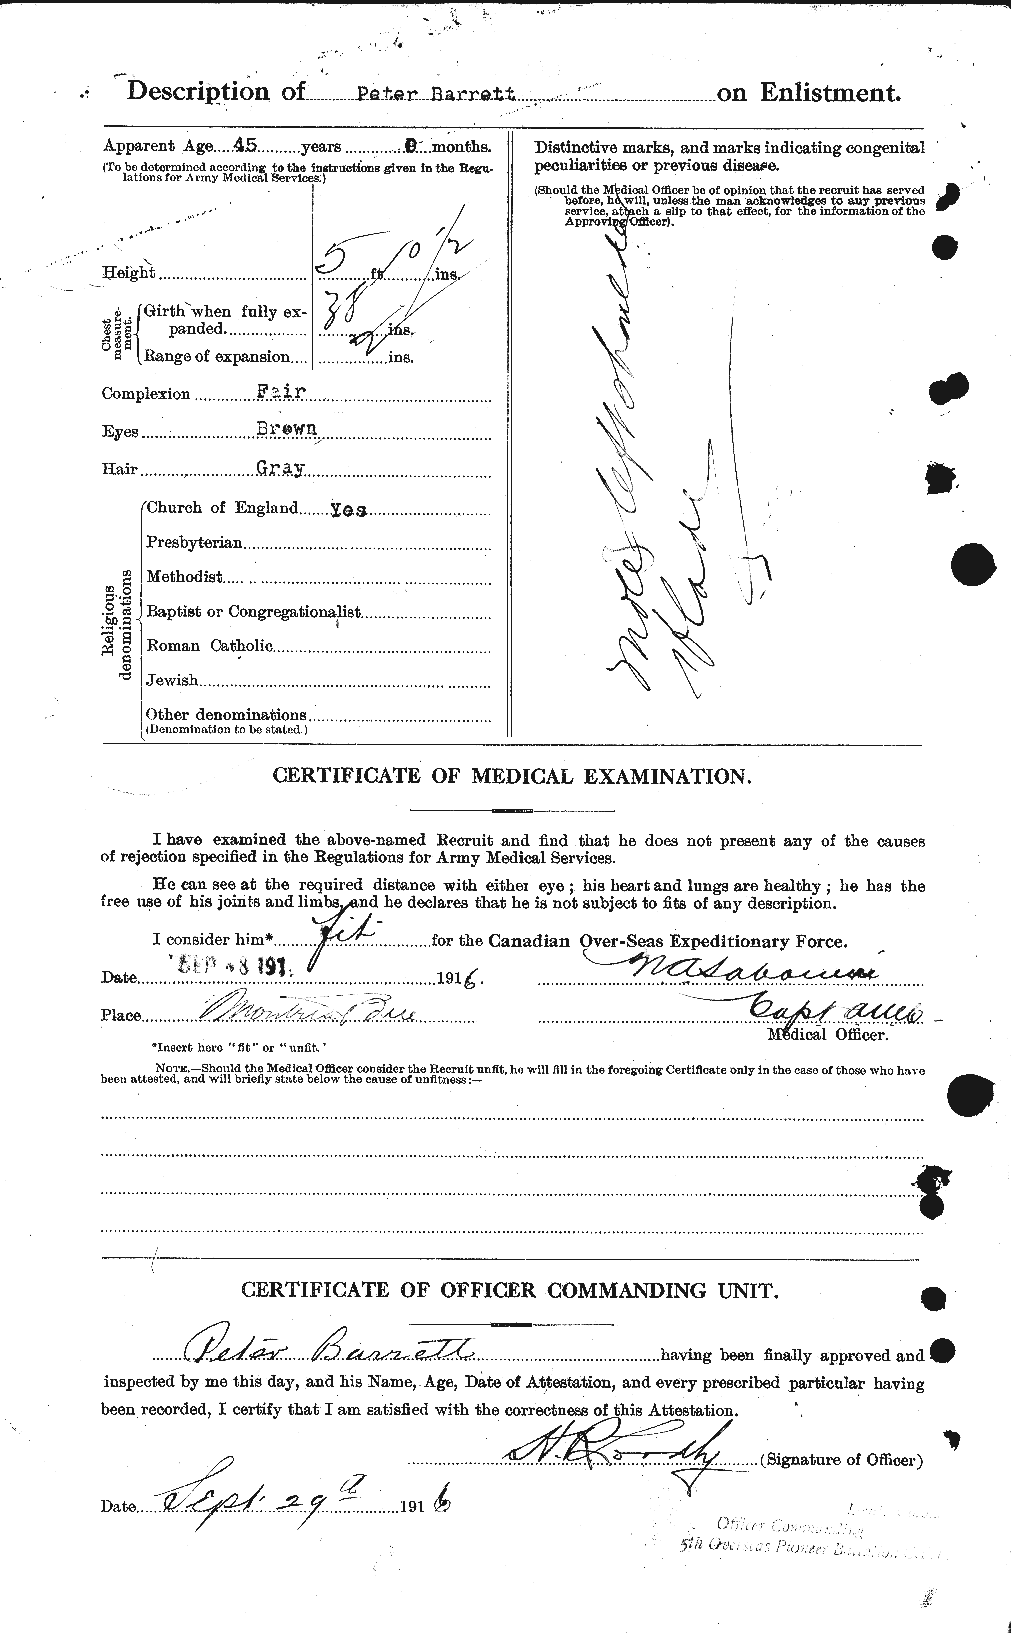 Personnel Records of the First World War - CEF 220202b